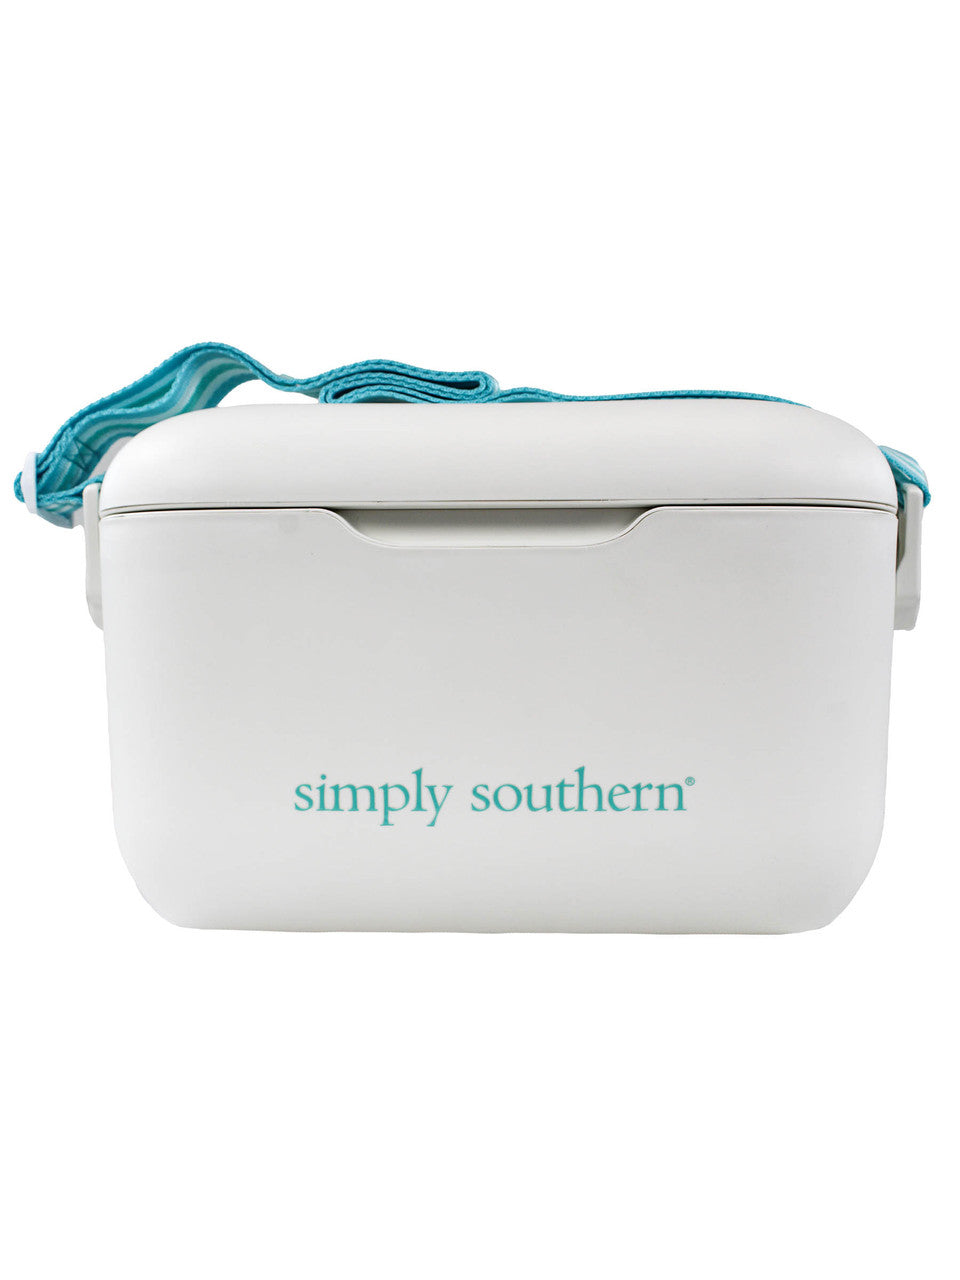 Simply Southern Vintage Style Cooler 21qt